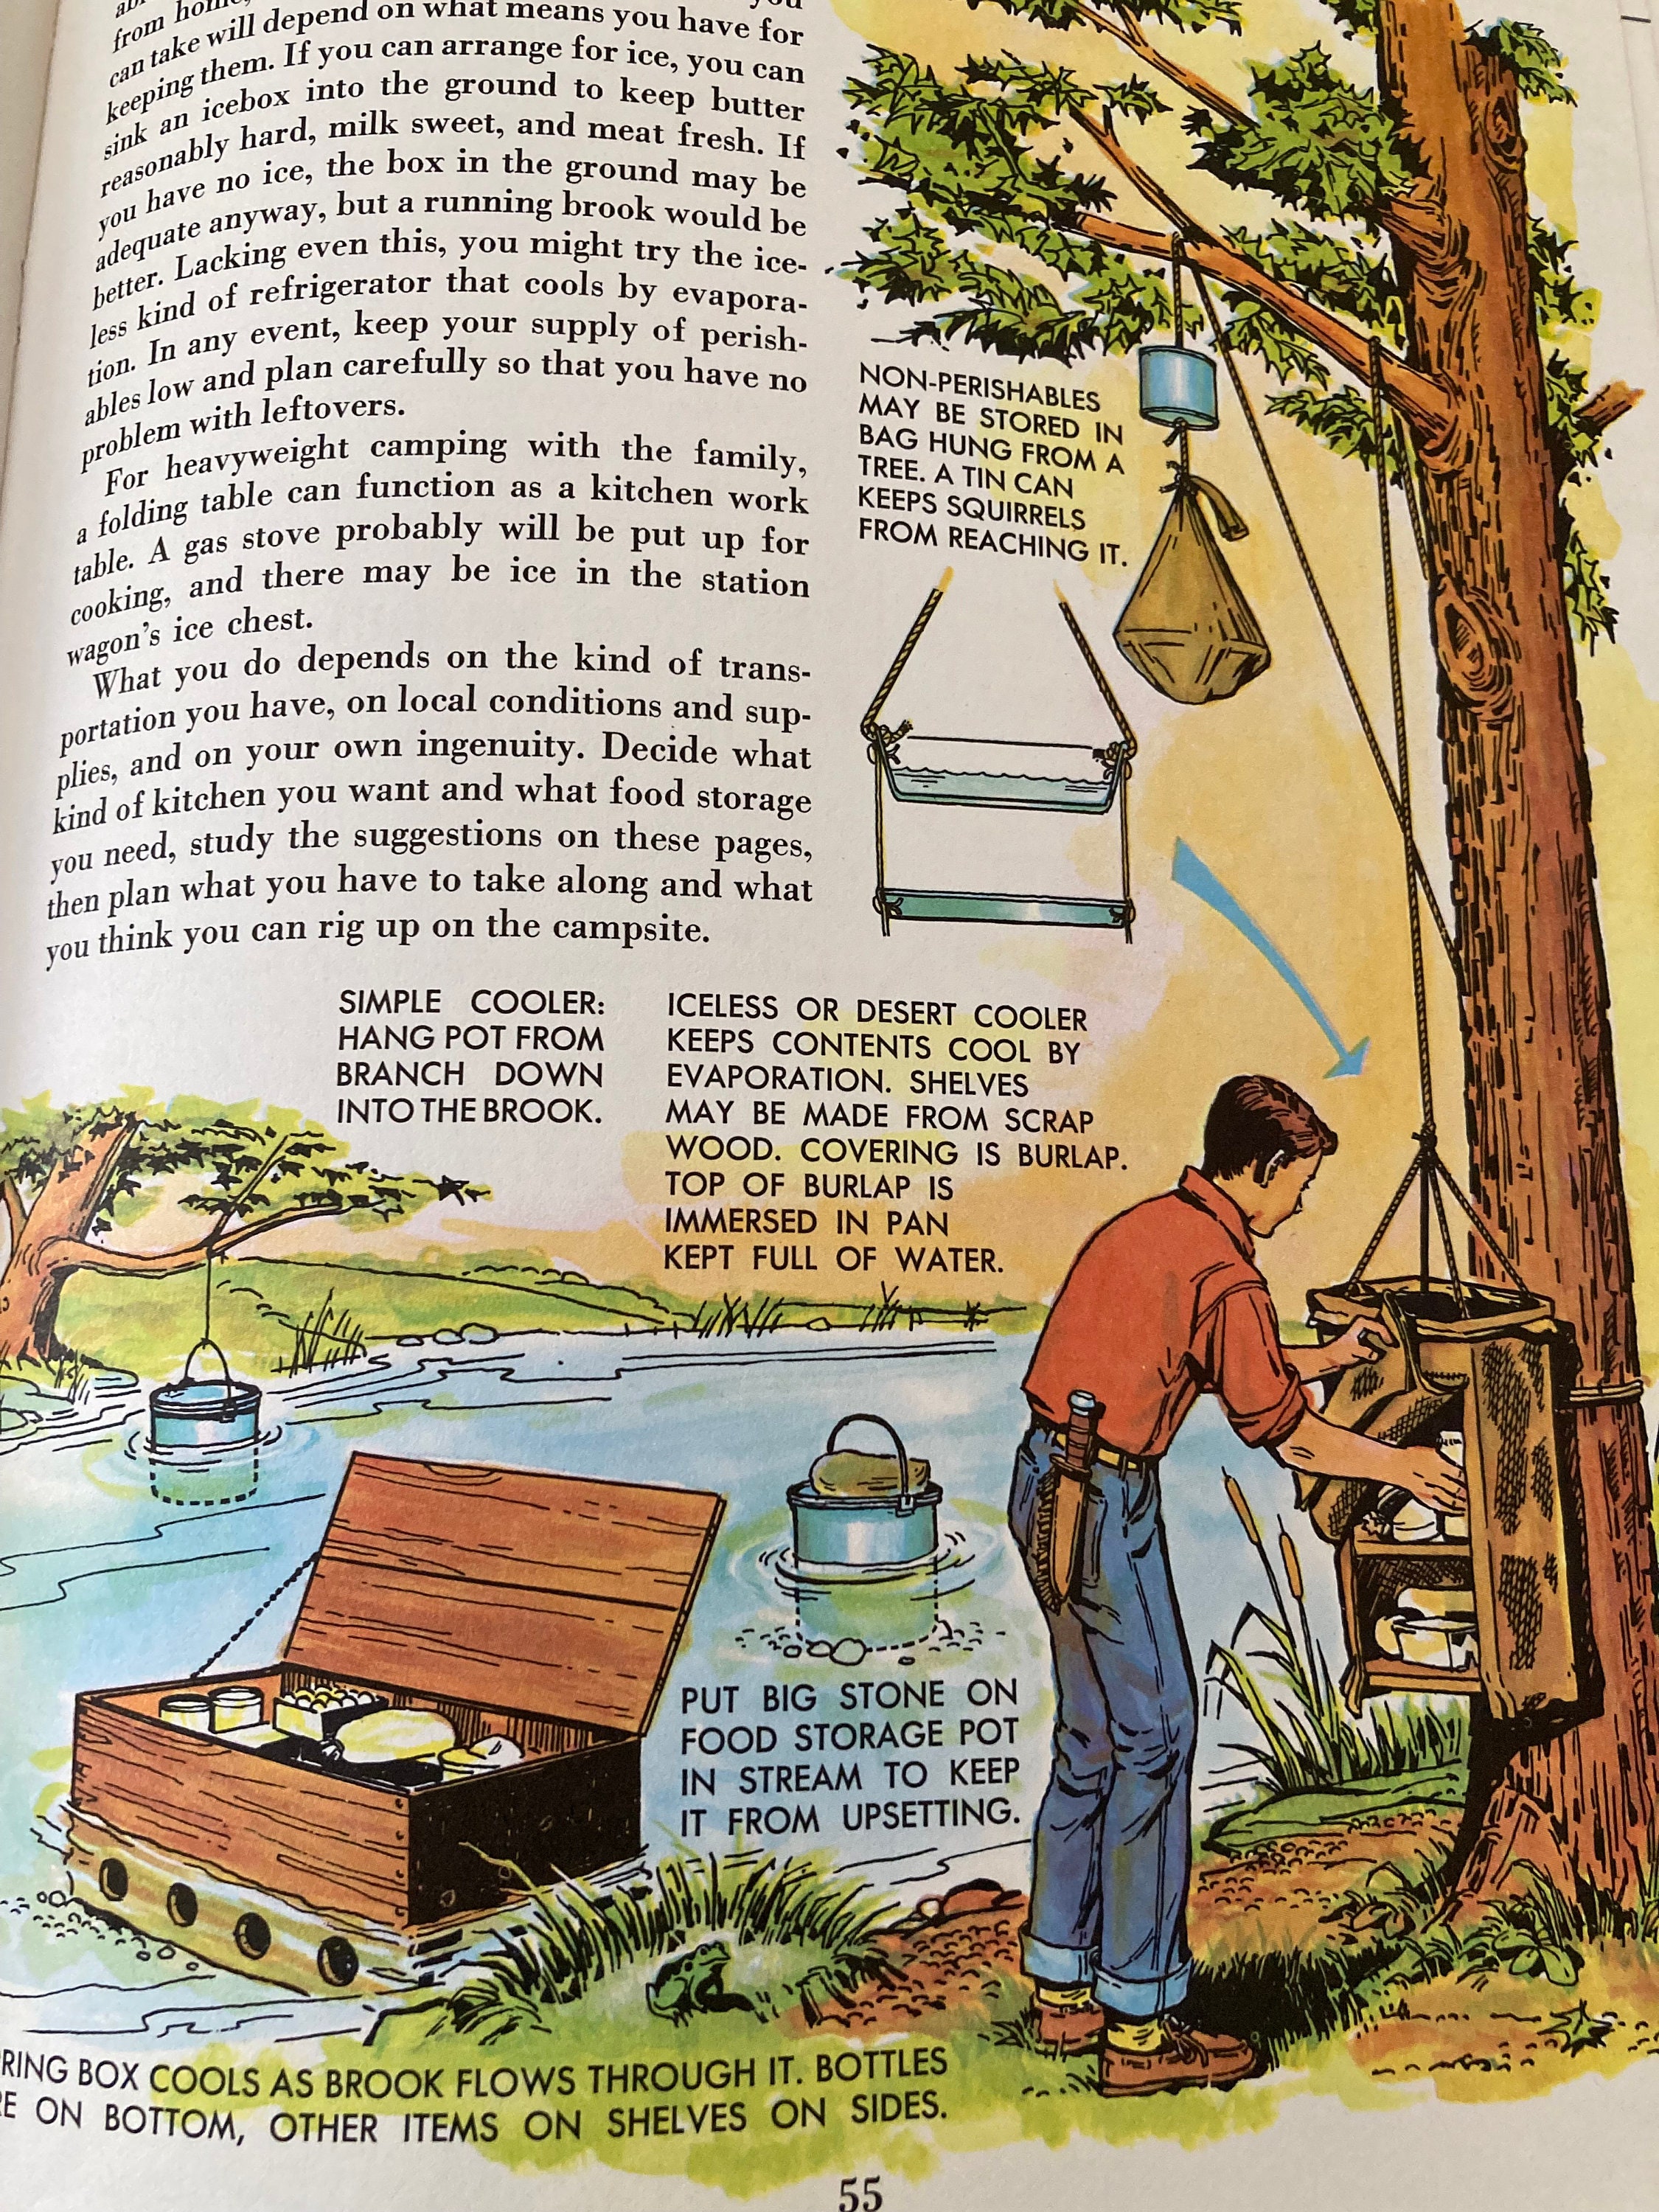 Classic 1971 Outdoors Book for Wilderness Camping, the Golden Book of  Camping by William Hillcourt, Rare & Glorious Hardcover, Iconic Art 